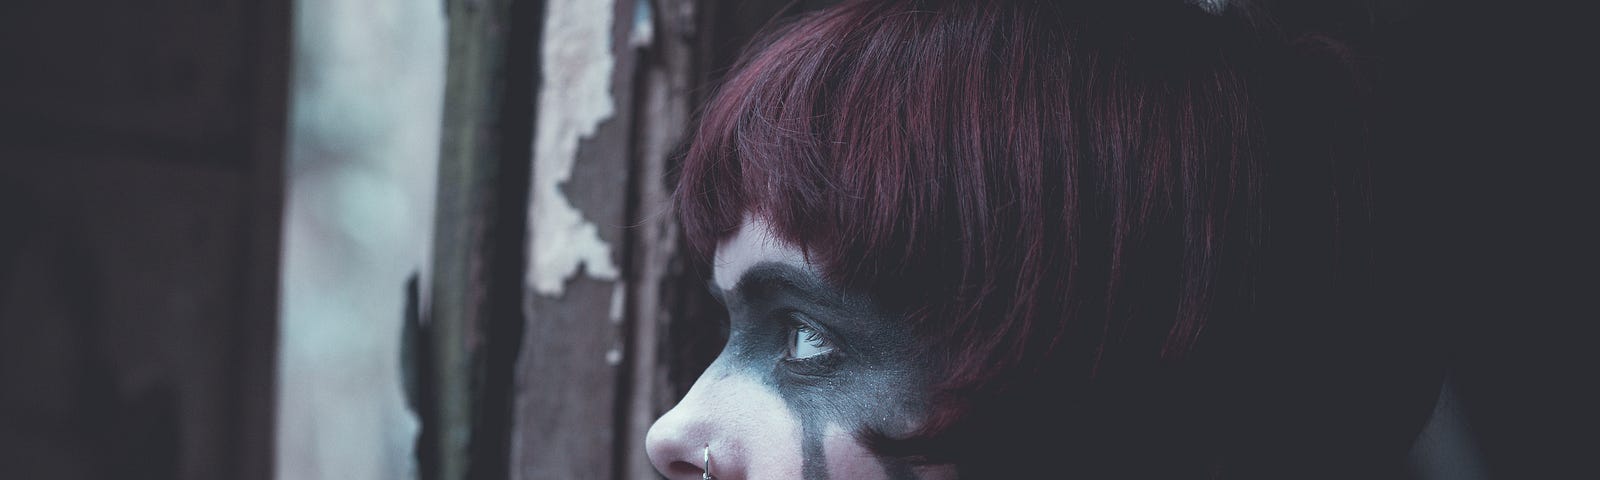 Woman at window with chipped brown paint behind her. She’s looking out window to the distance, her right arm is resting on the sill and her thumb is pressing on her bottom lip. She has black makeup painted in a splotch over her left eye and extending back beneath her maroon hair.